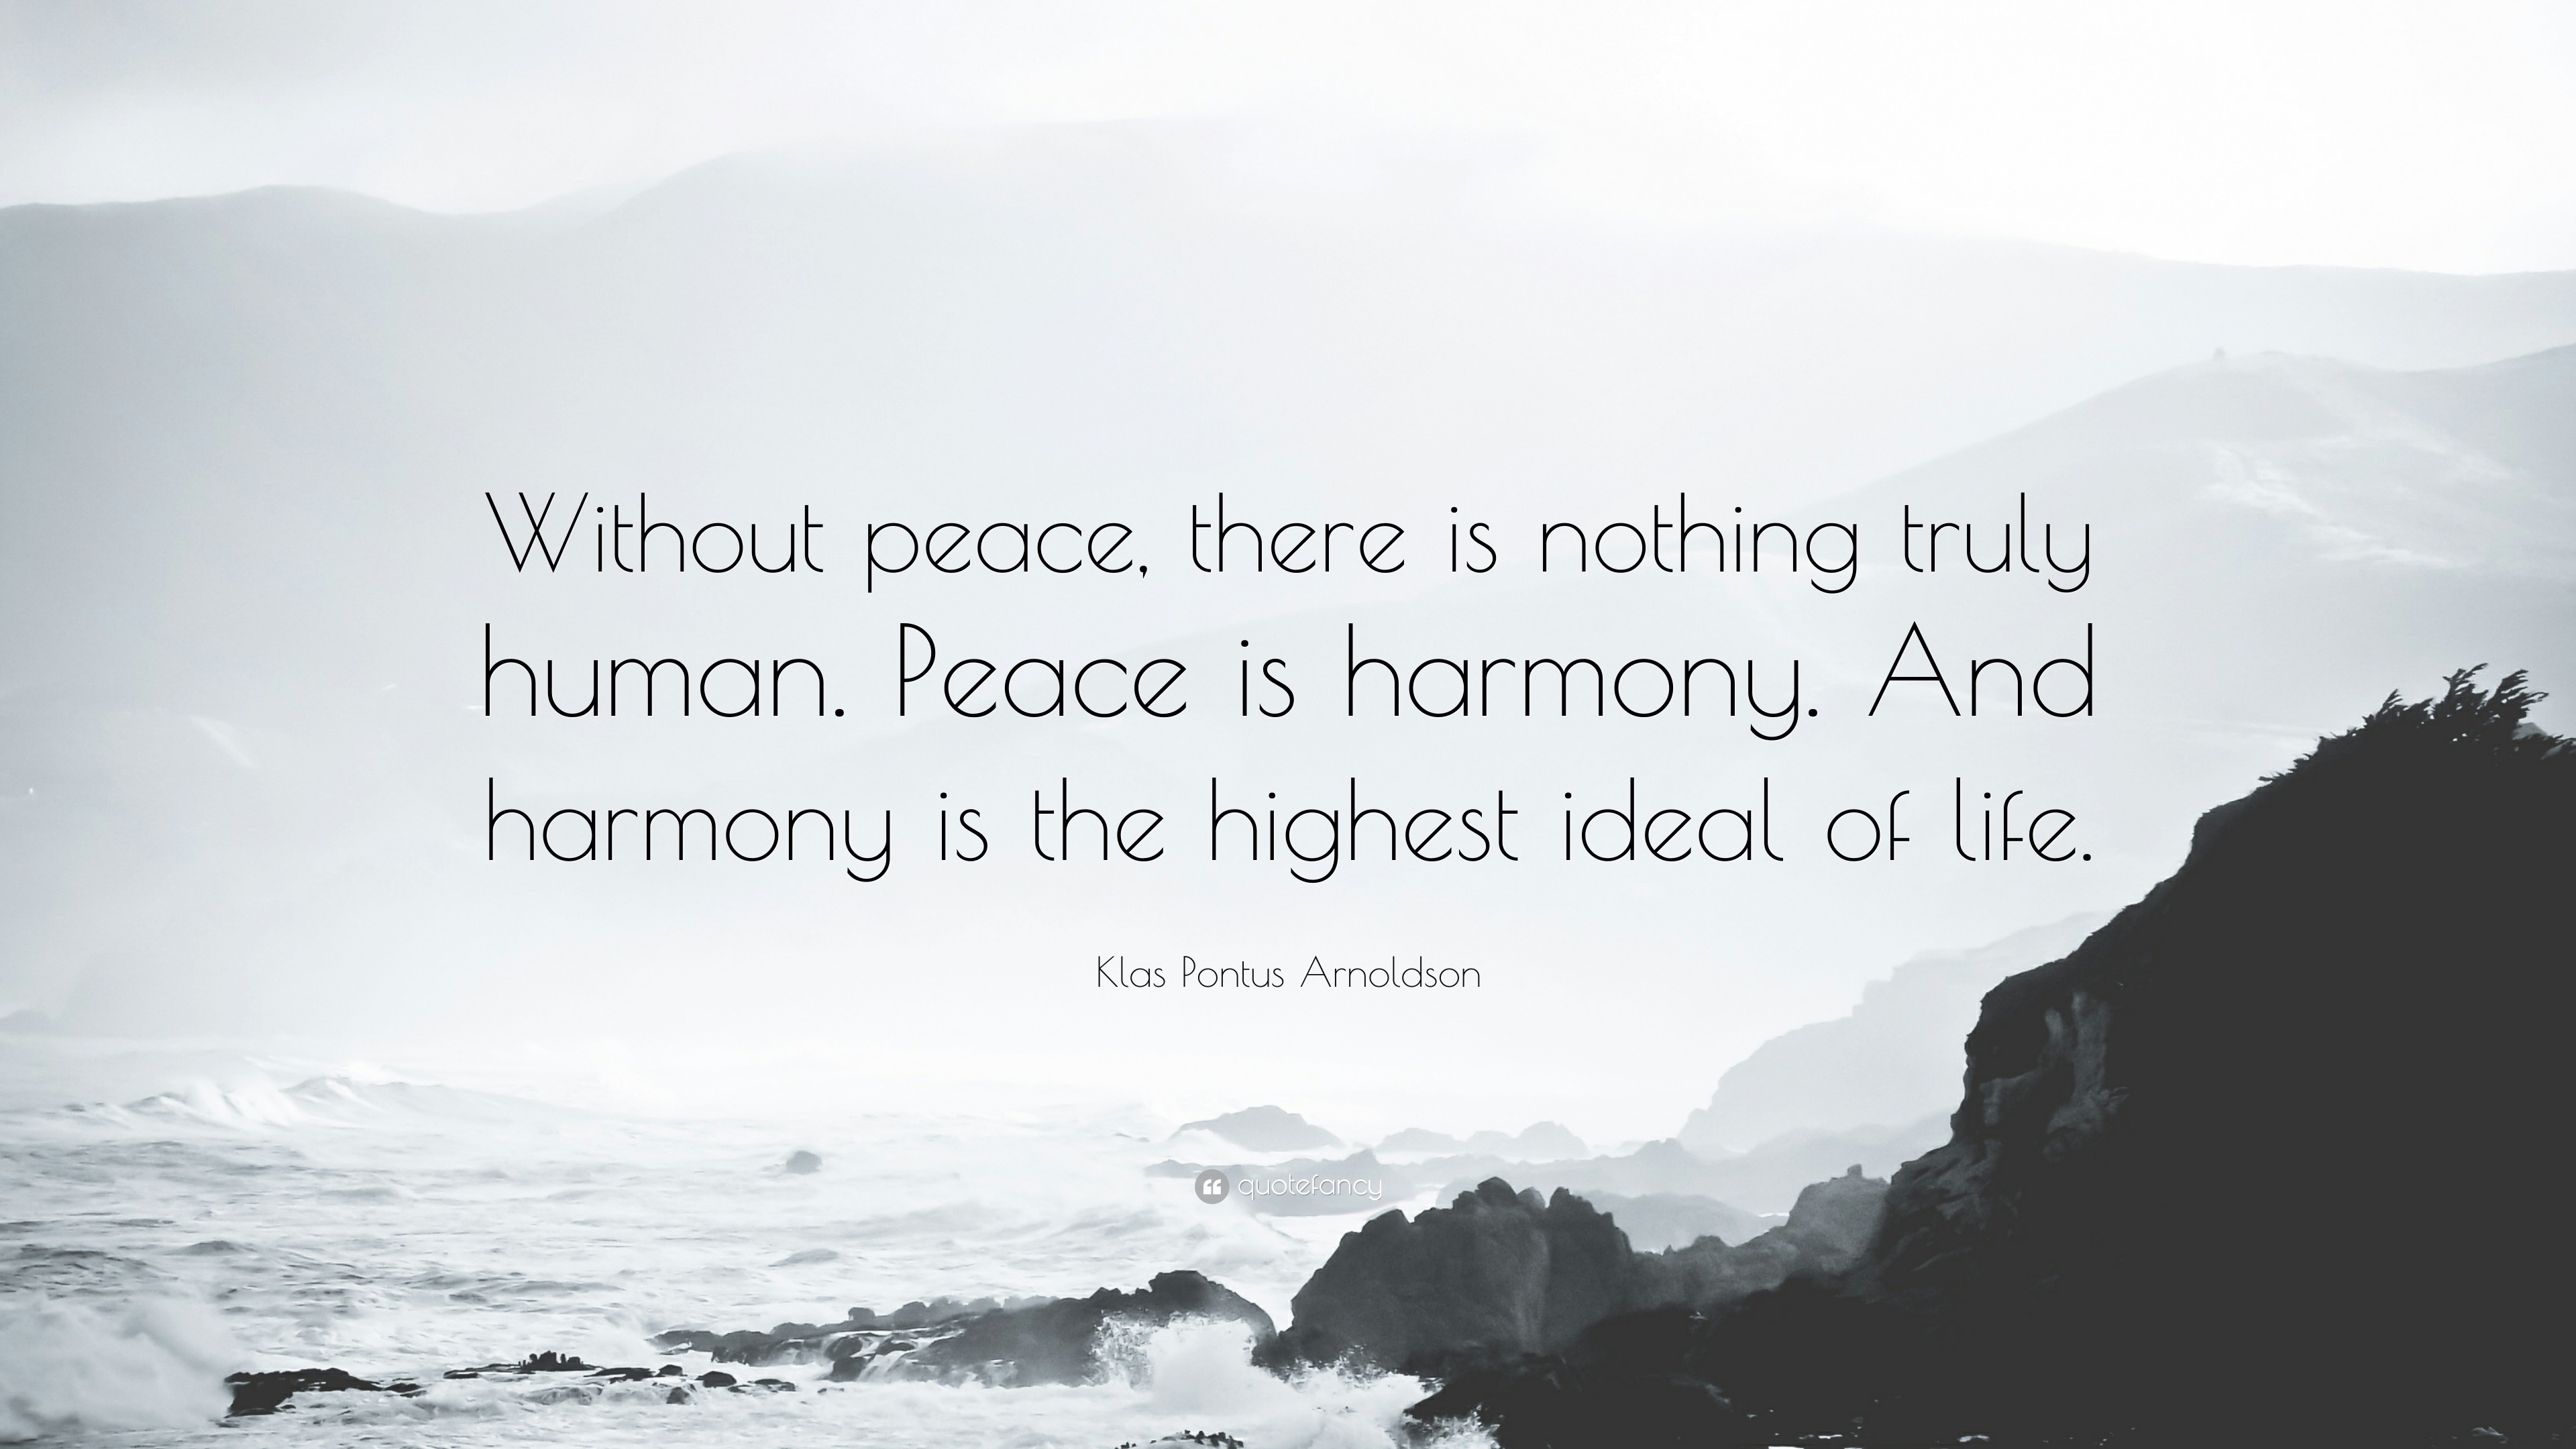 Klas Pontus Arnoldson Quote: “Without peace, there is nothing truly